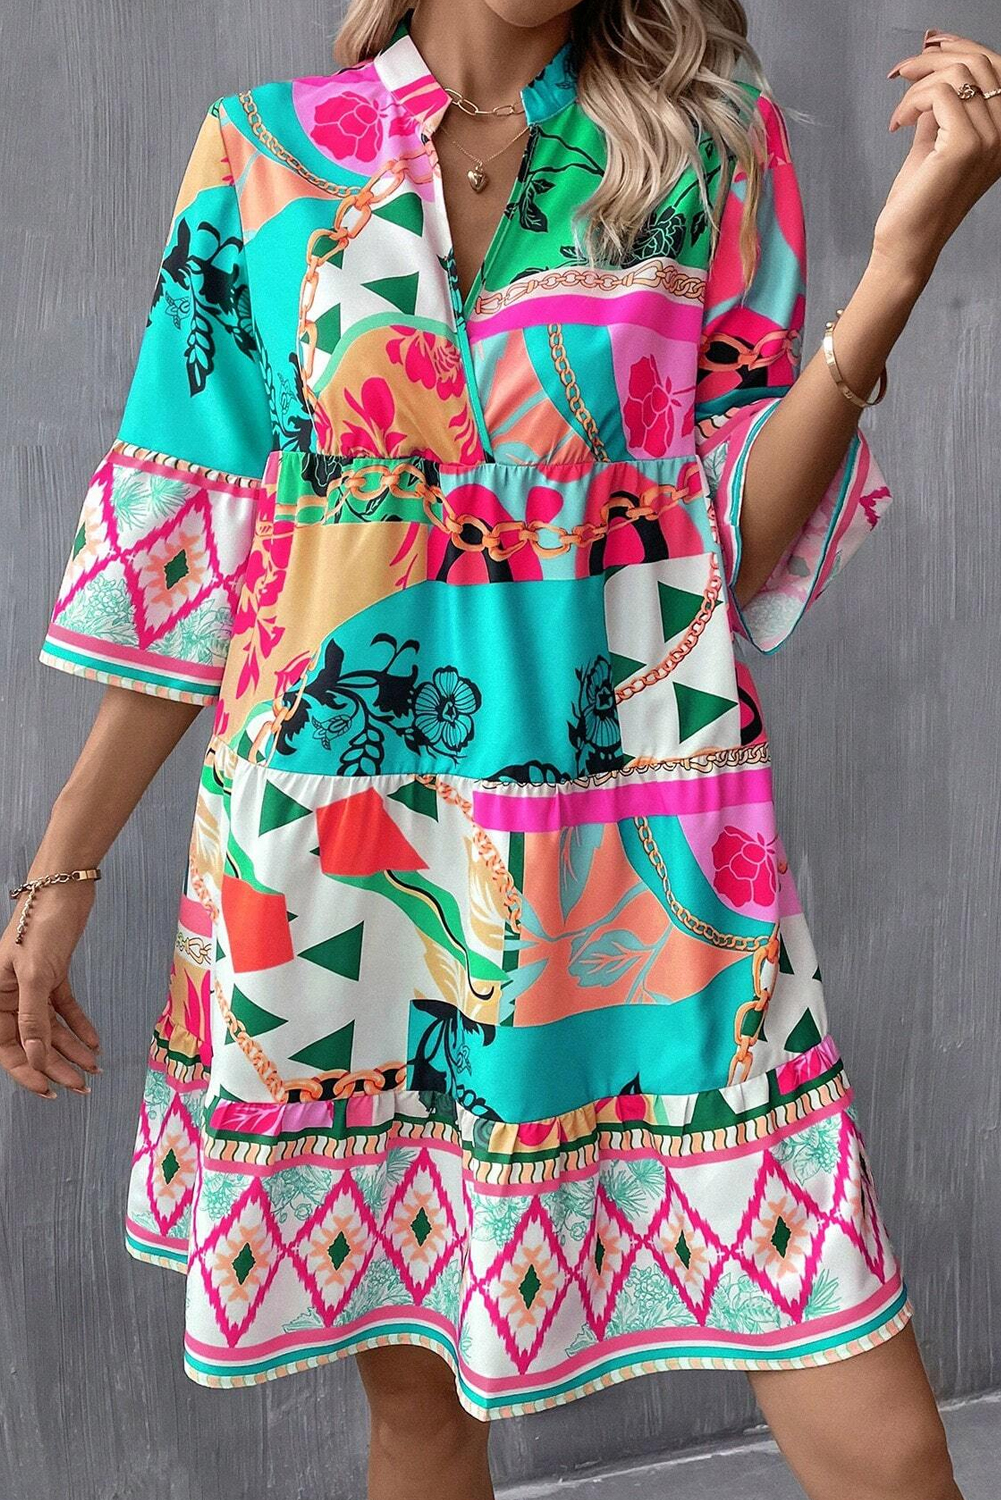 Shewin Wholesale Dropshippers Multicolour Boho Abstract Print Flowy Tiered DRESS